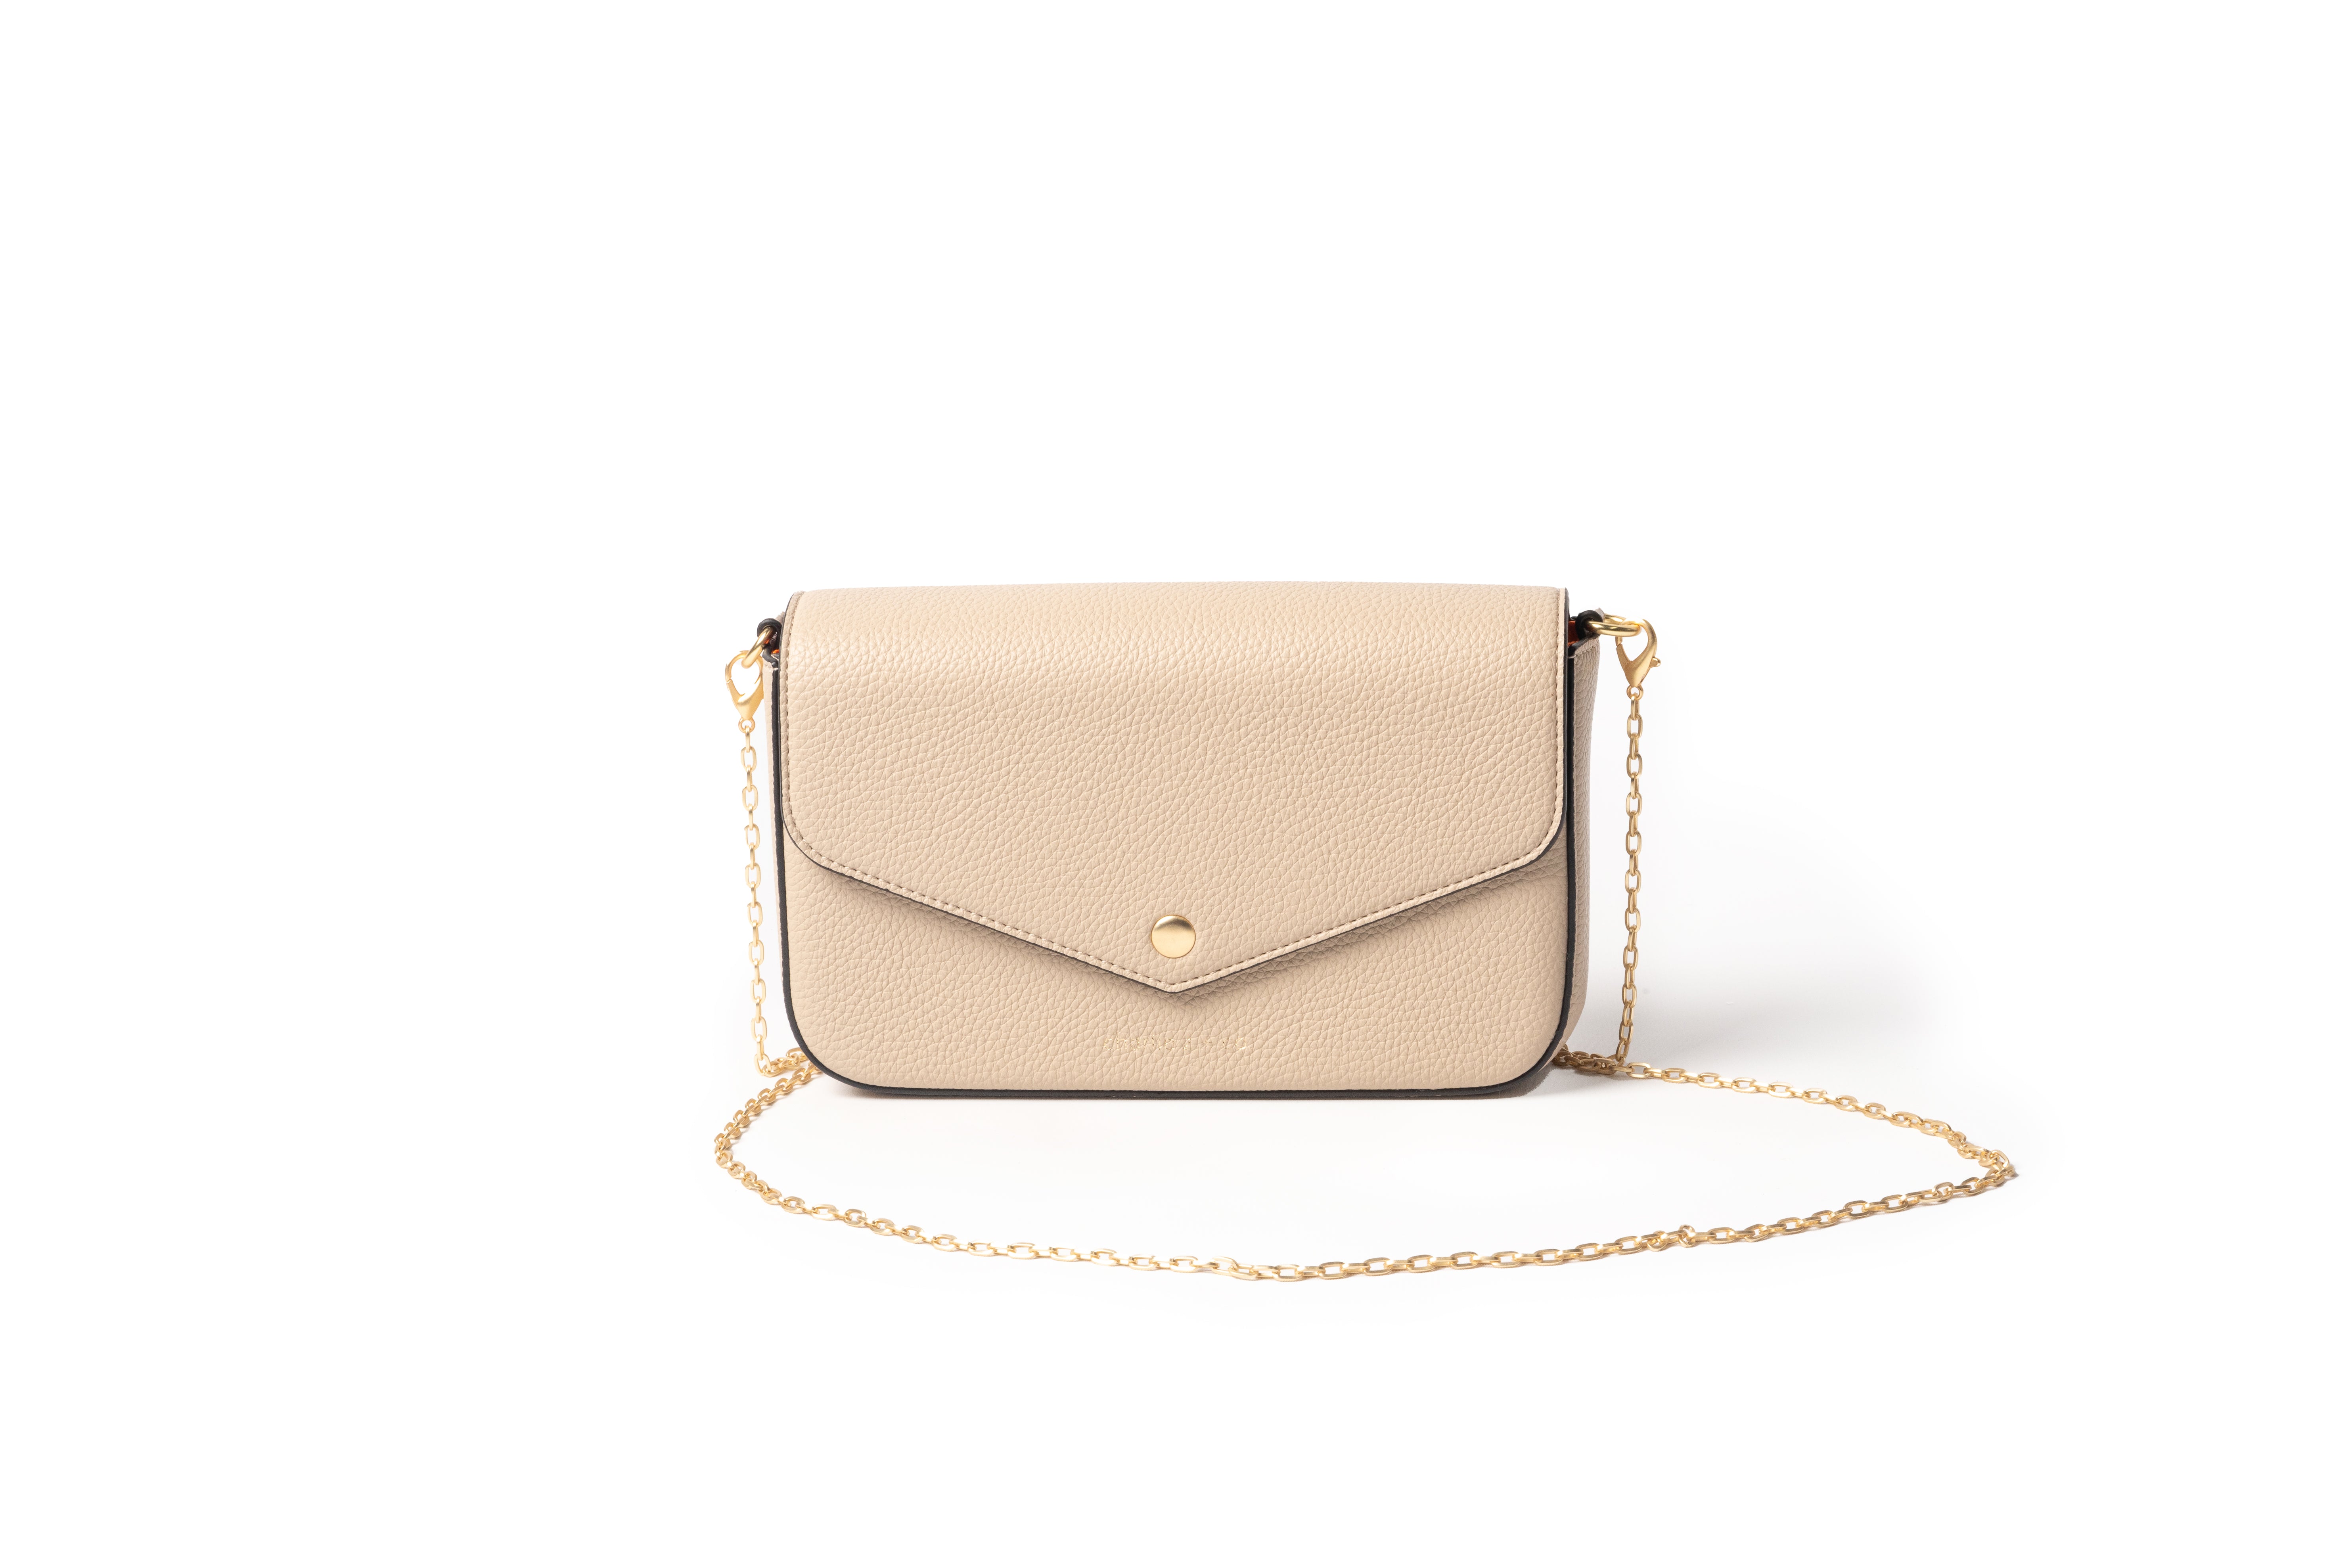 Where can I find a nicer version of this Zara bag? : r/handbags